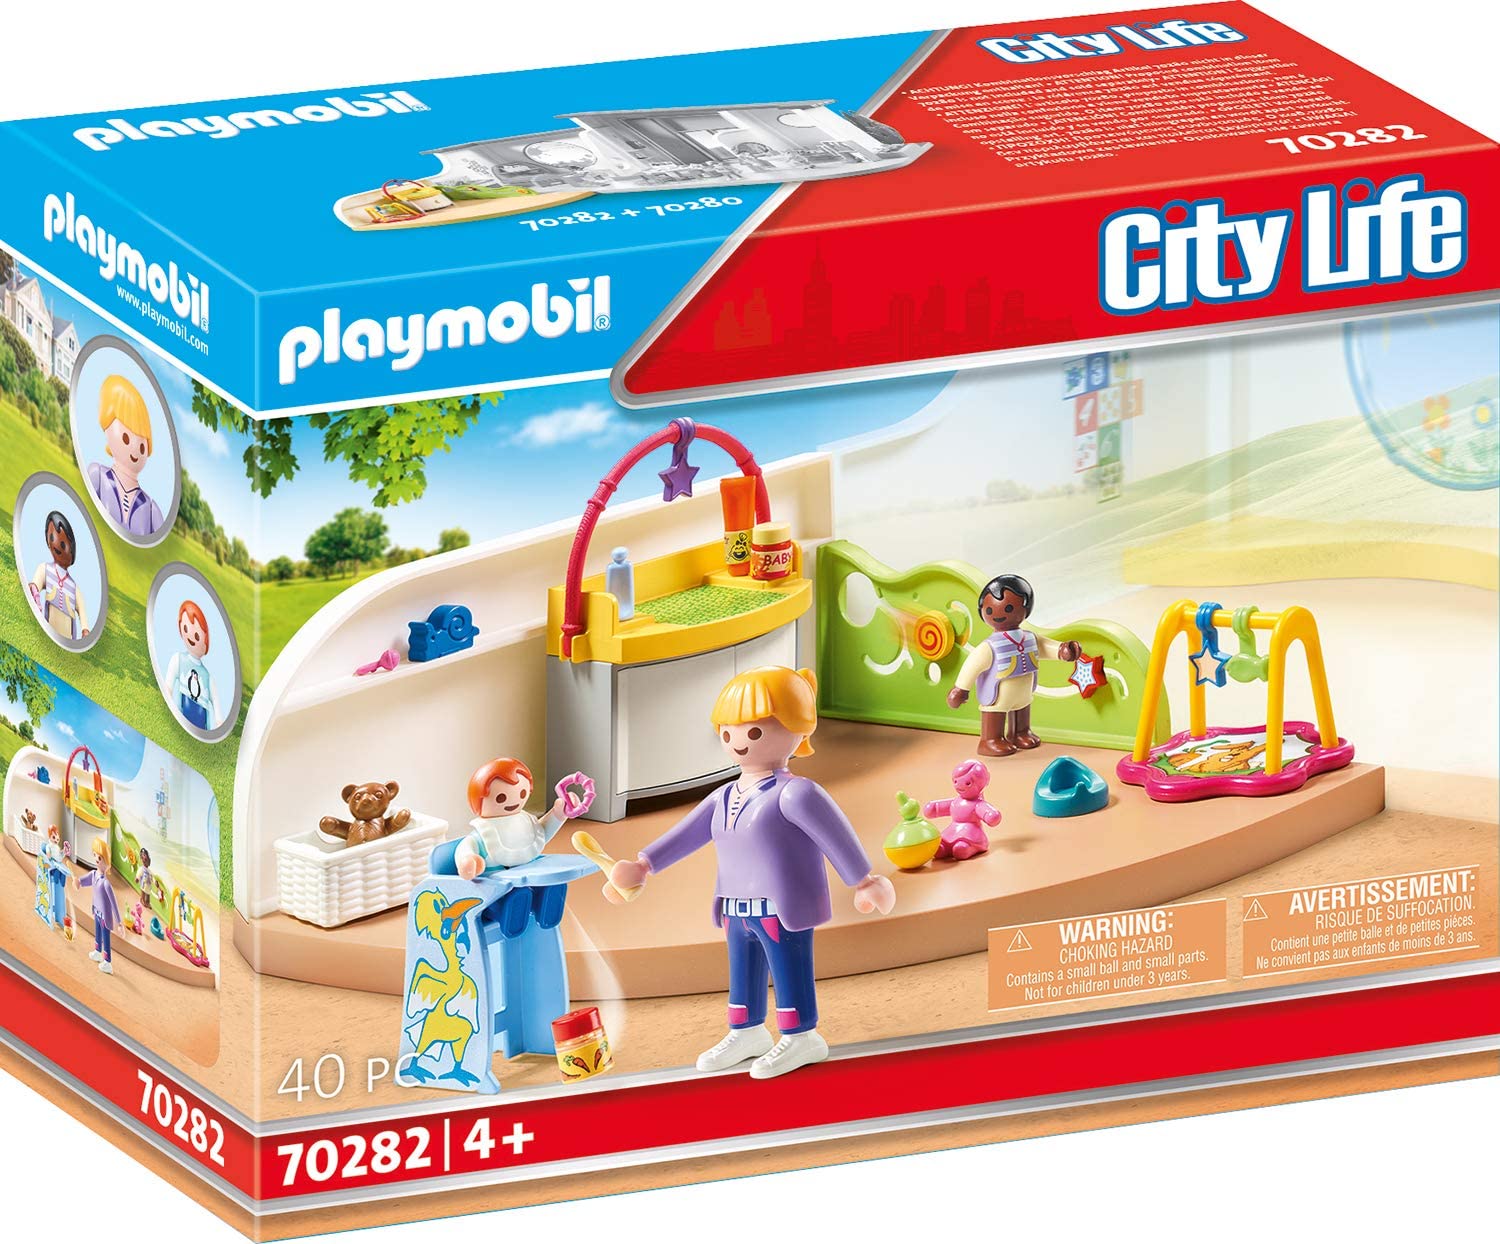 Playmobil City Life 70282 Play Group From 4 Years